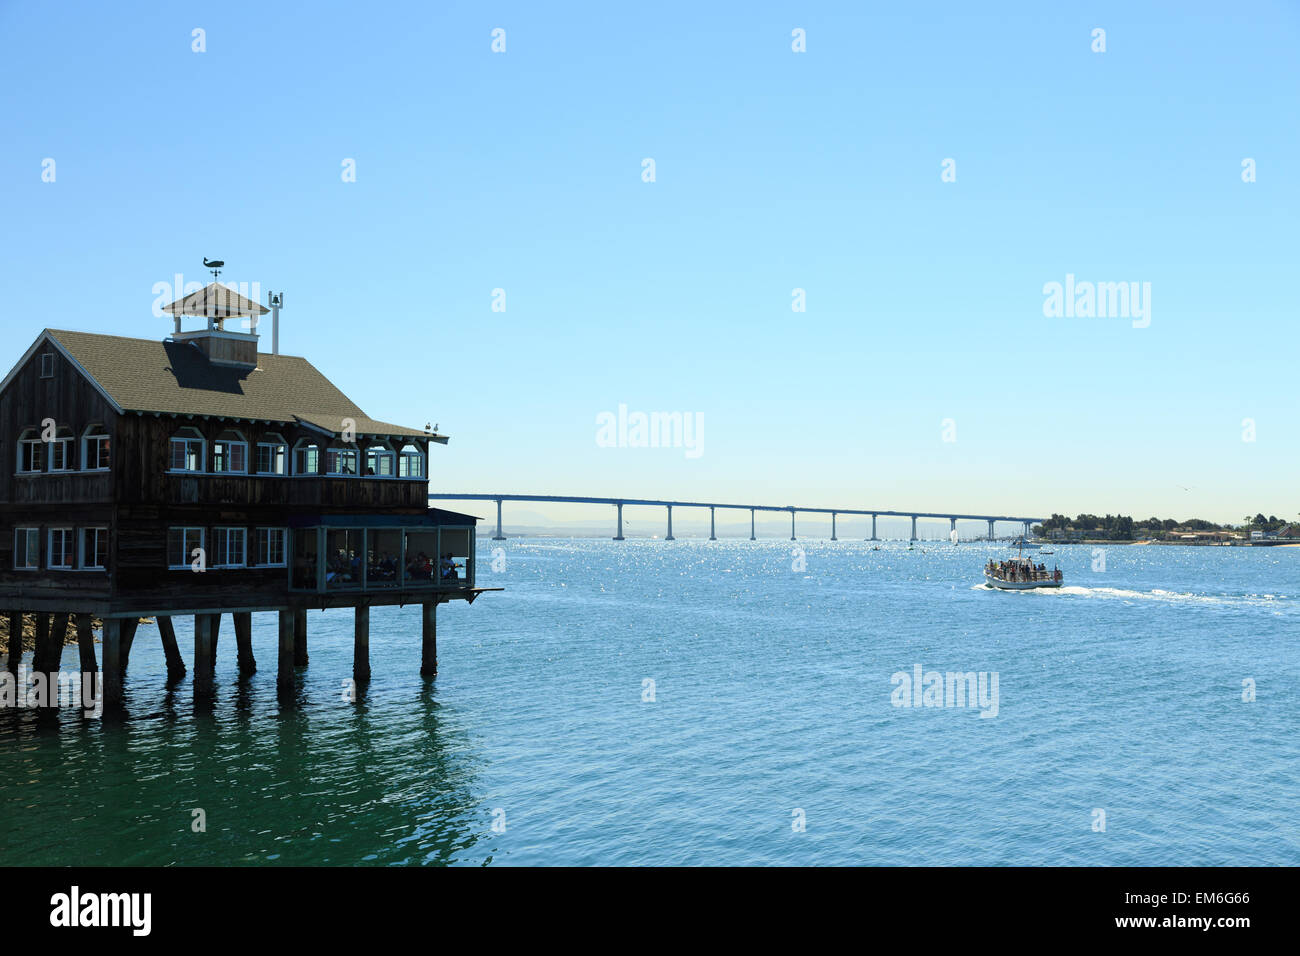 A photograph of Pier Cafe in San Diego at Seaport Village. The San Diego Pier Cafe, a San Diego landmark. Stock Photo